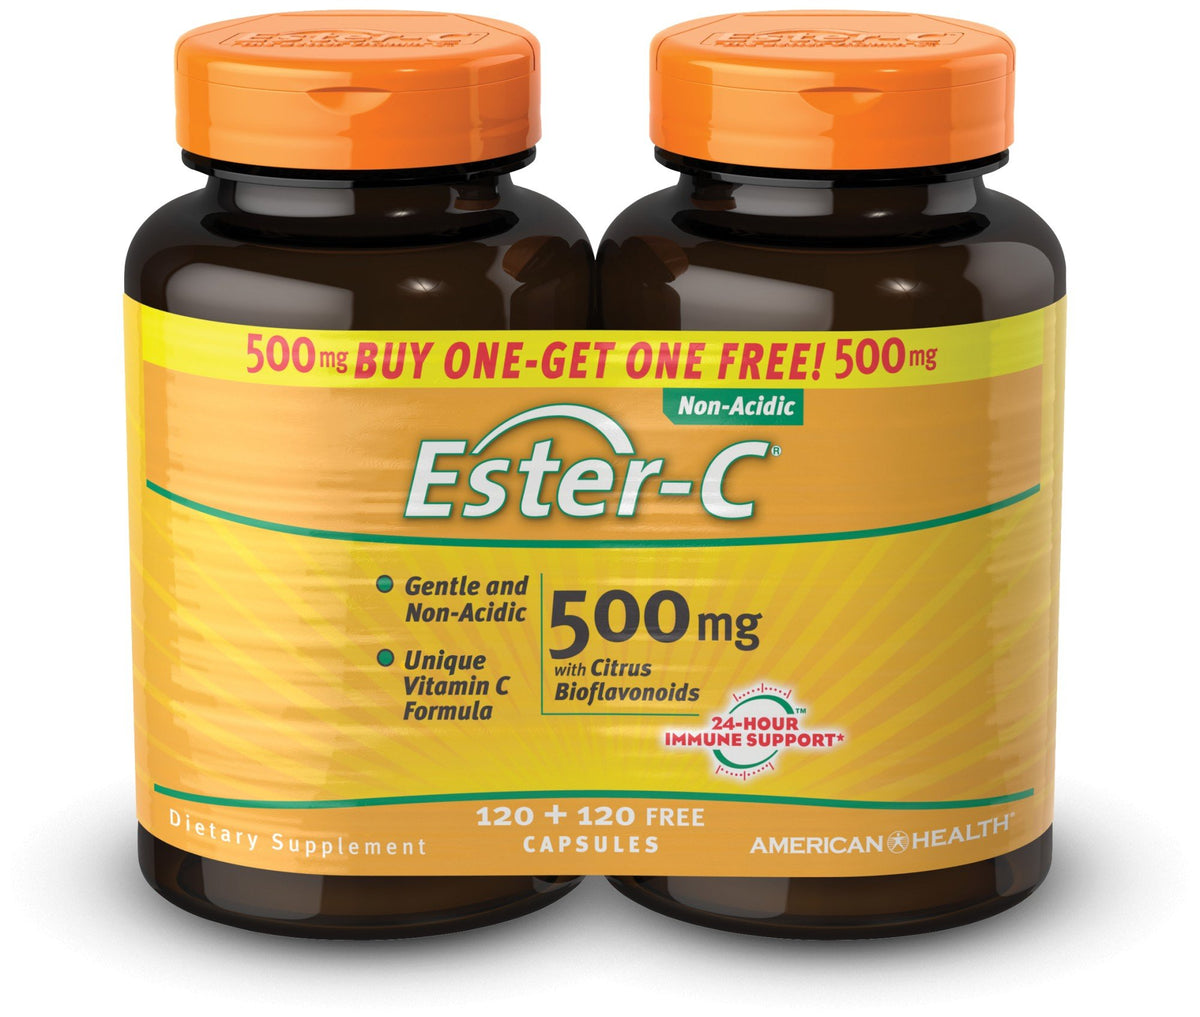 American Health Products Ester-C 500 mg with Citrus Bioflavonoids 120+120 Free 120+120 Capsule